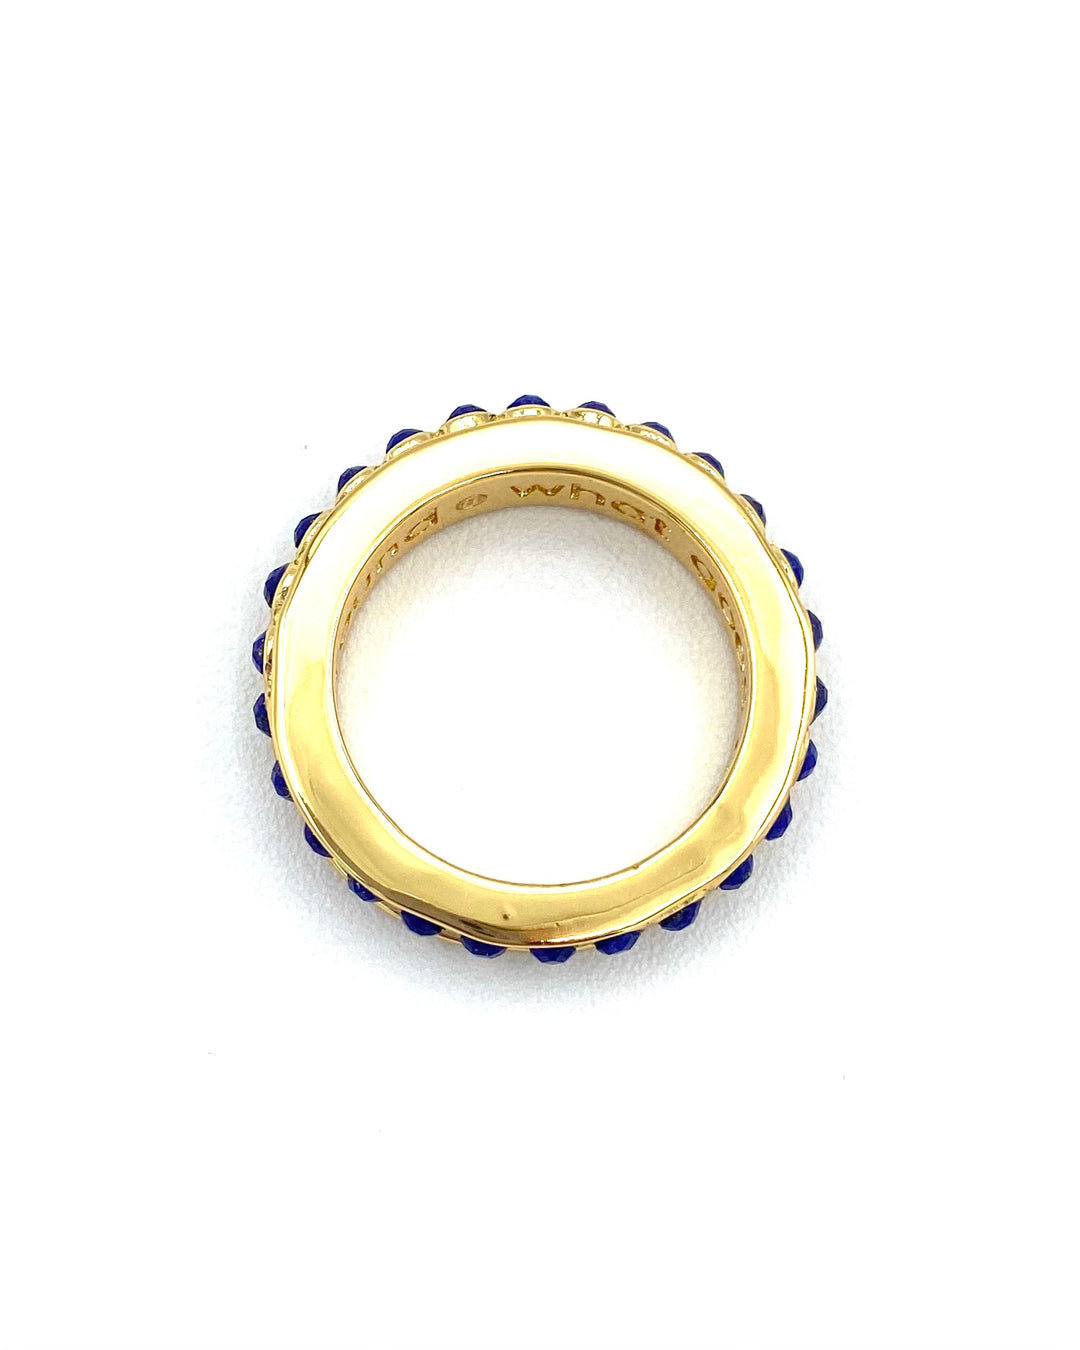 Gold With Navy Blue Gemstones Ring - Size 7